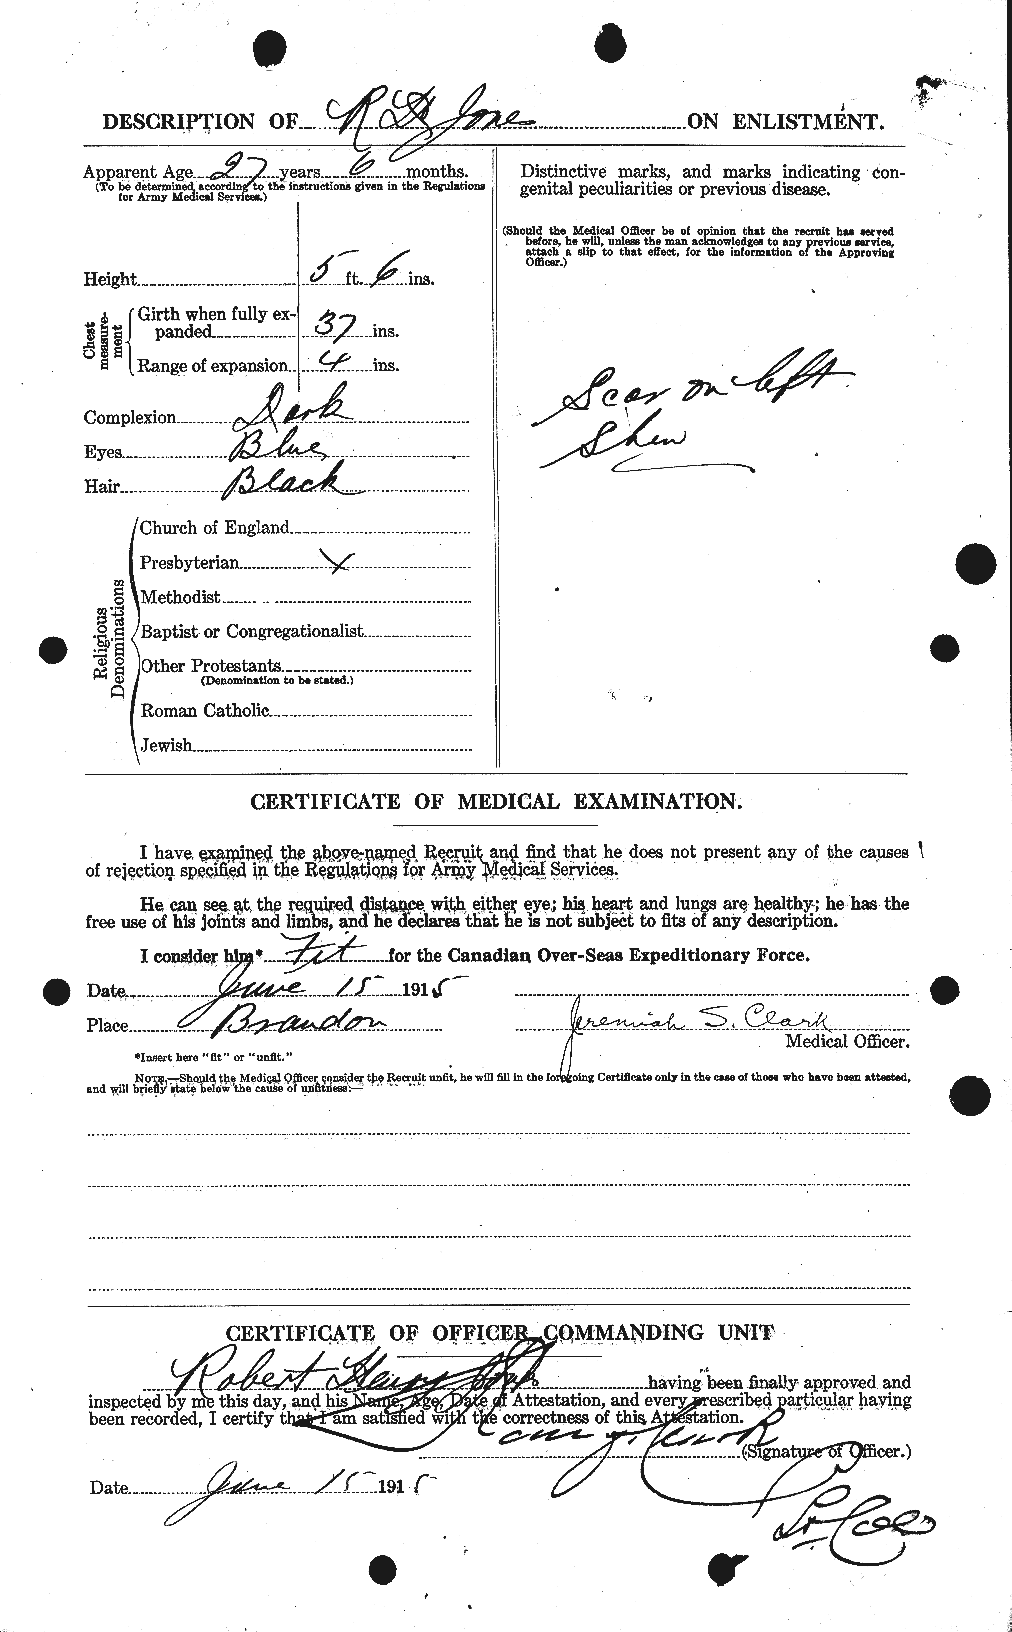 Personnel Records of the First World War - CEF 424955b